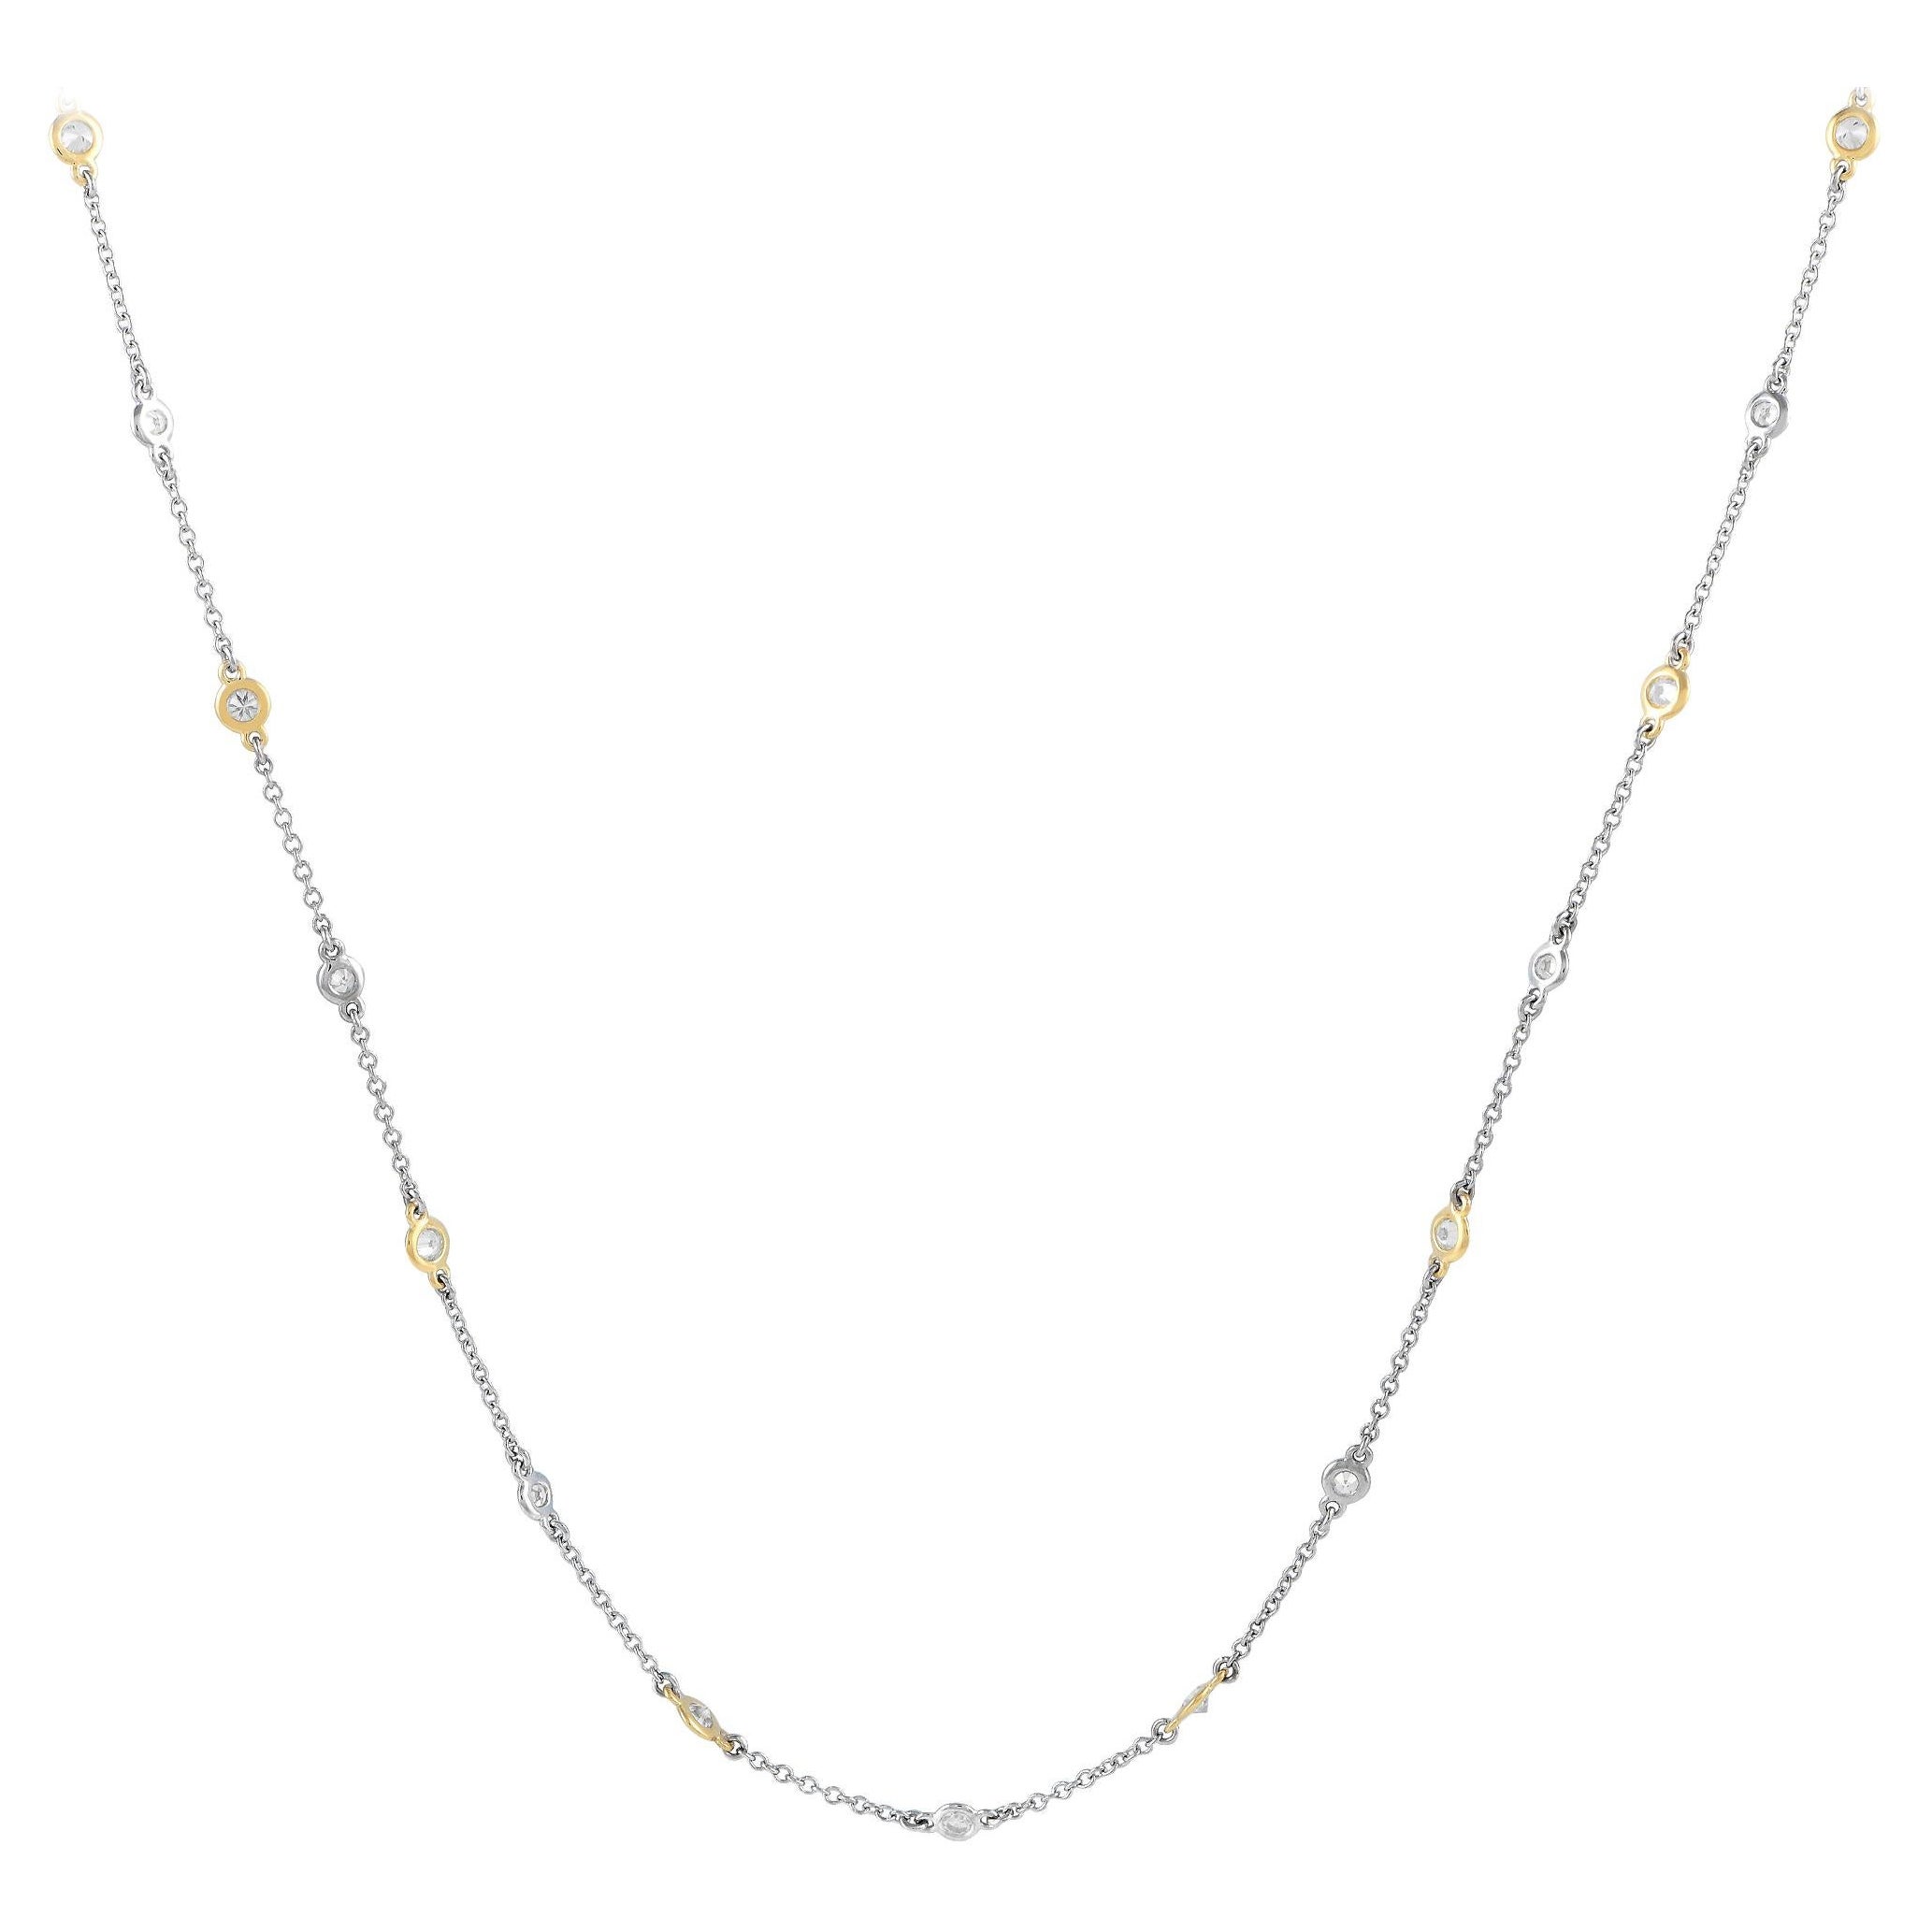 LB Exclusive 18K White and Yellow Gold 1.34ct Diamond Station Necklace ...